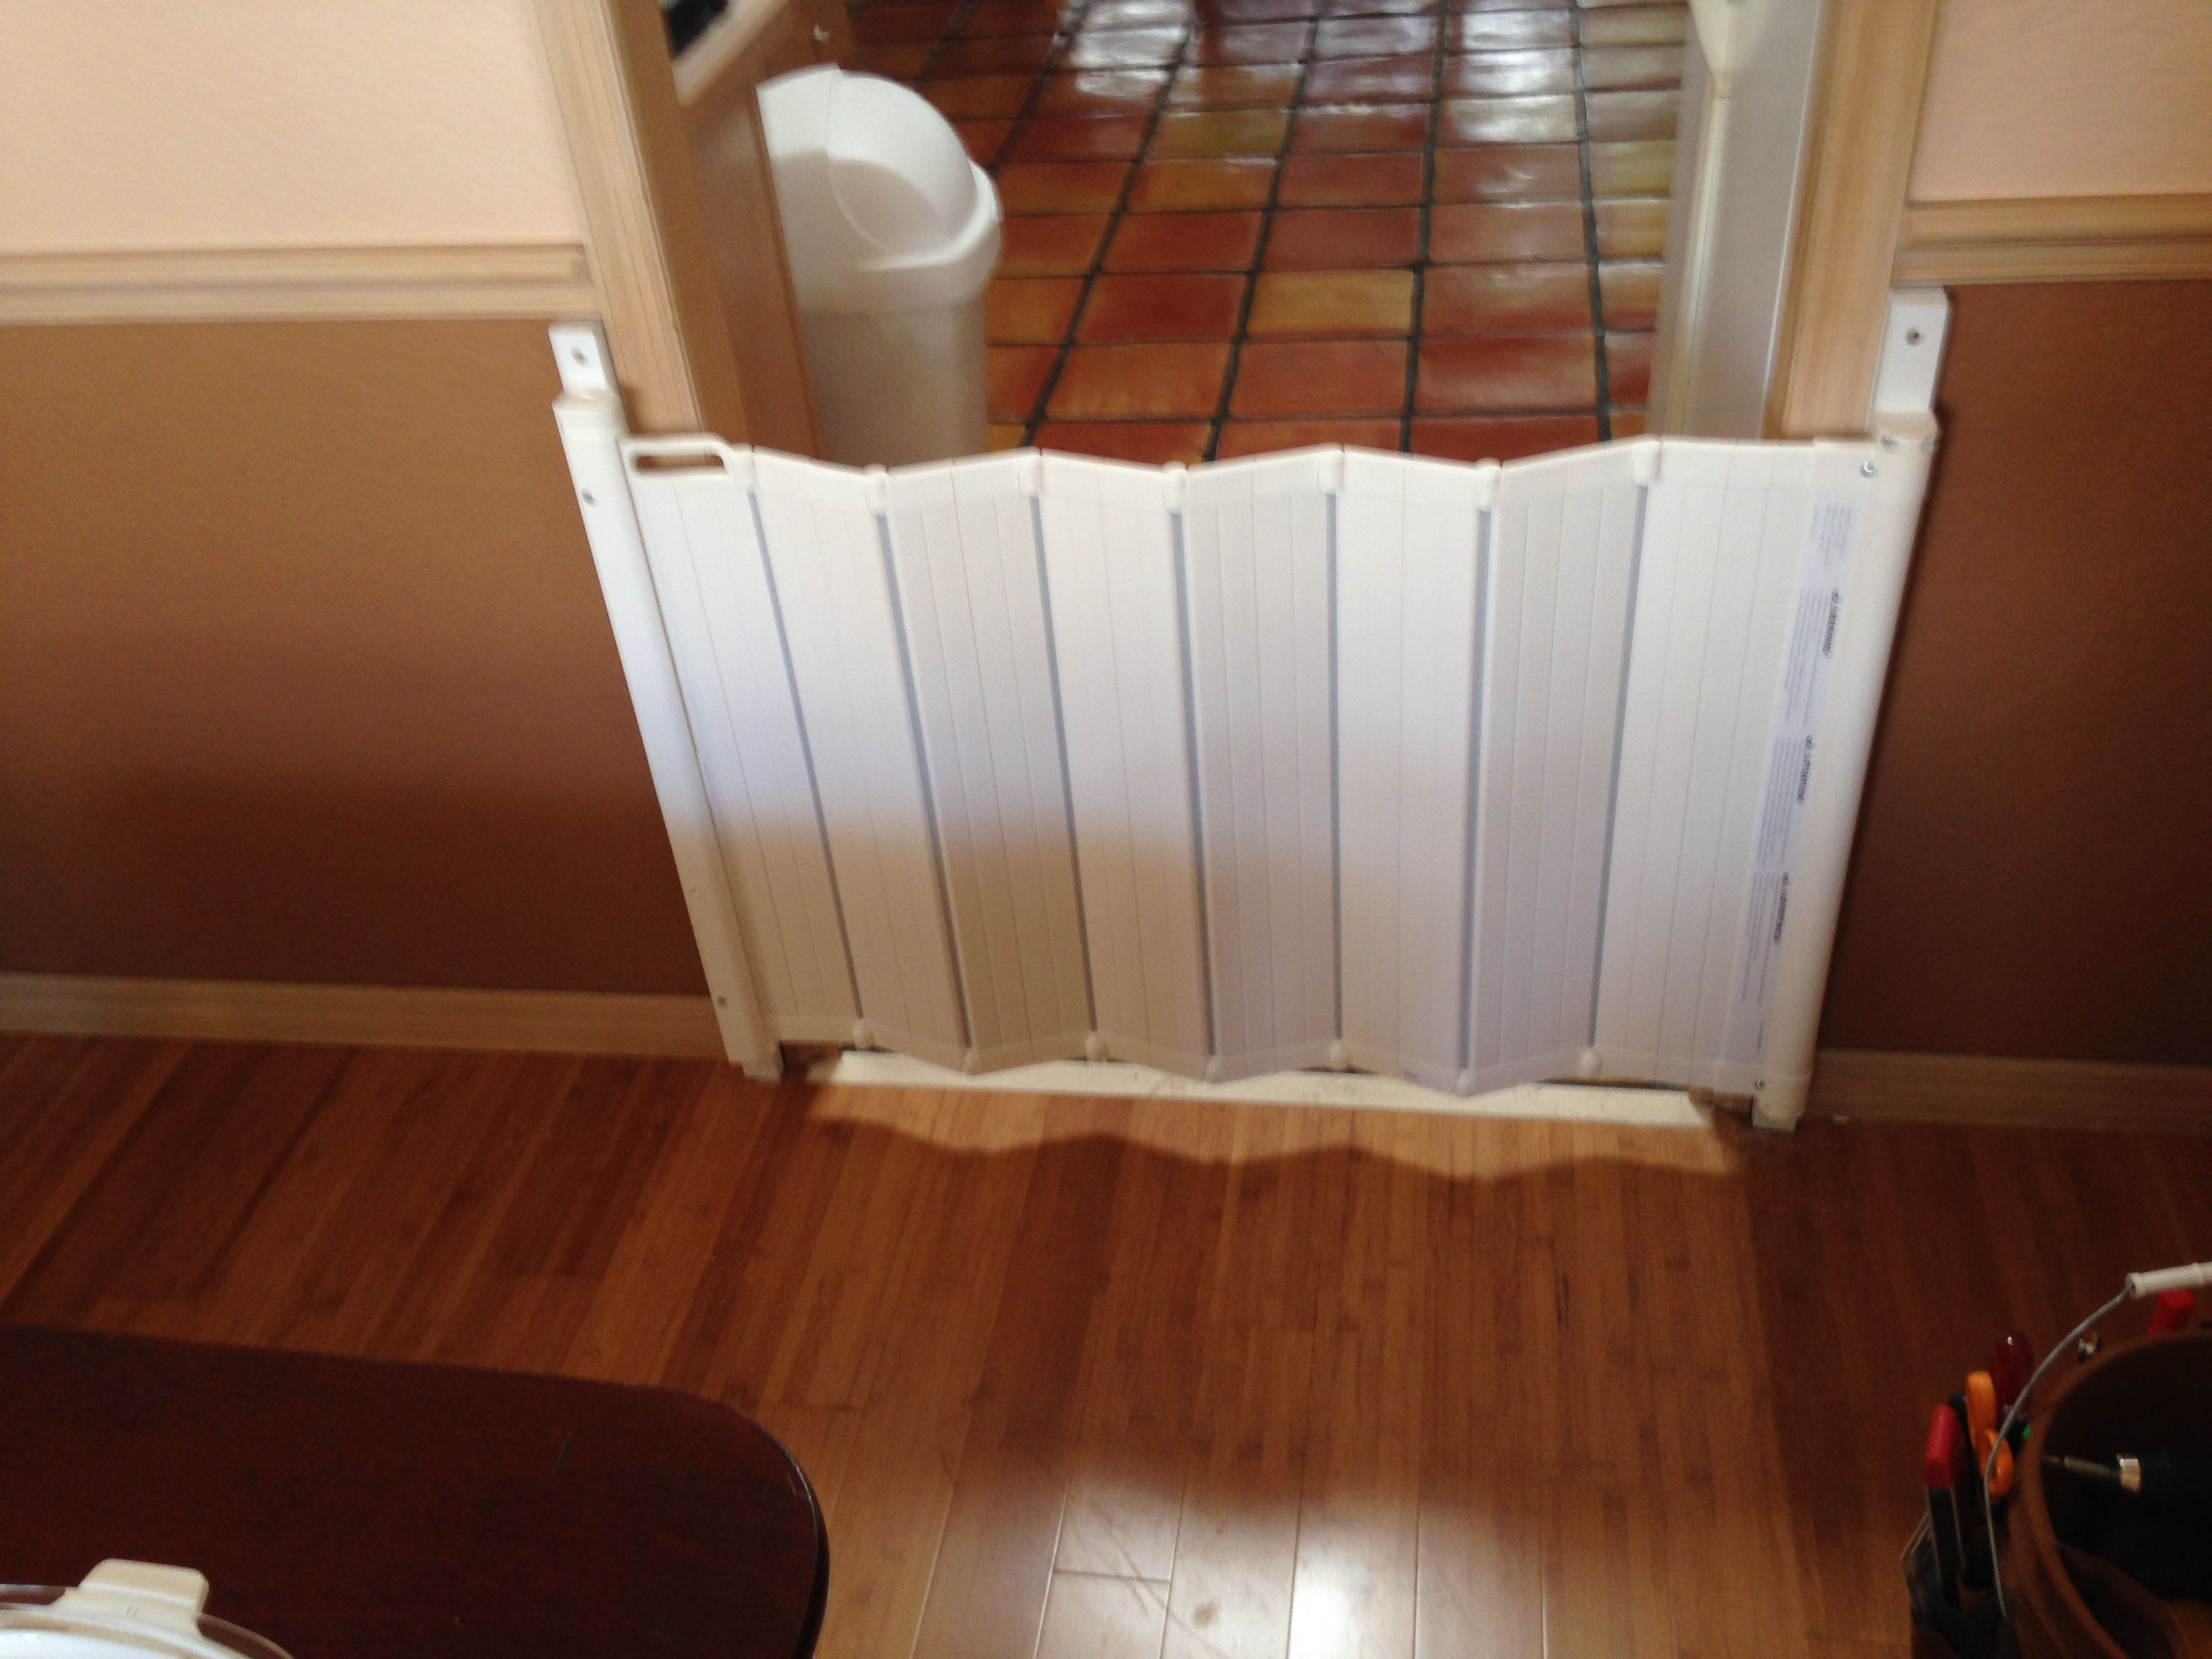 Fireplace Gate for Baby Proofing Inspirational Fold Away Baby Gate This New Gate Folds to the Wall when